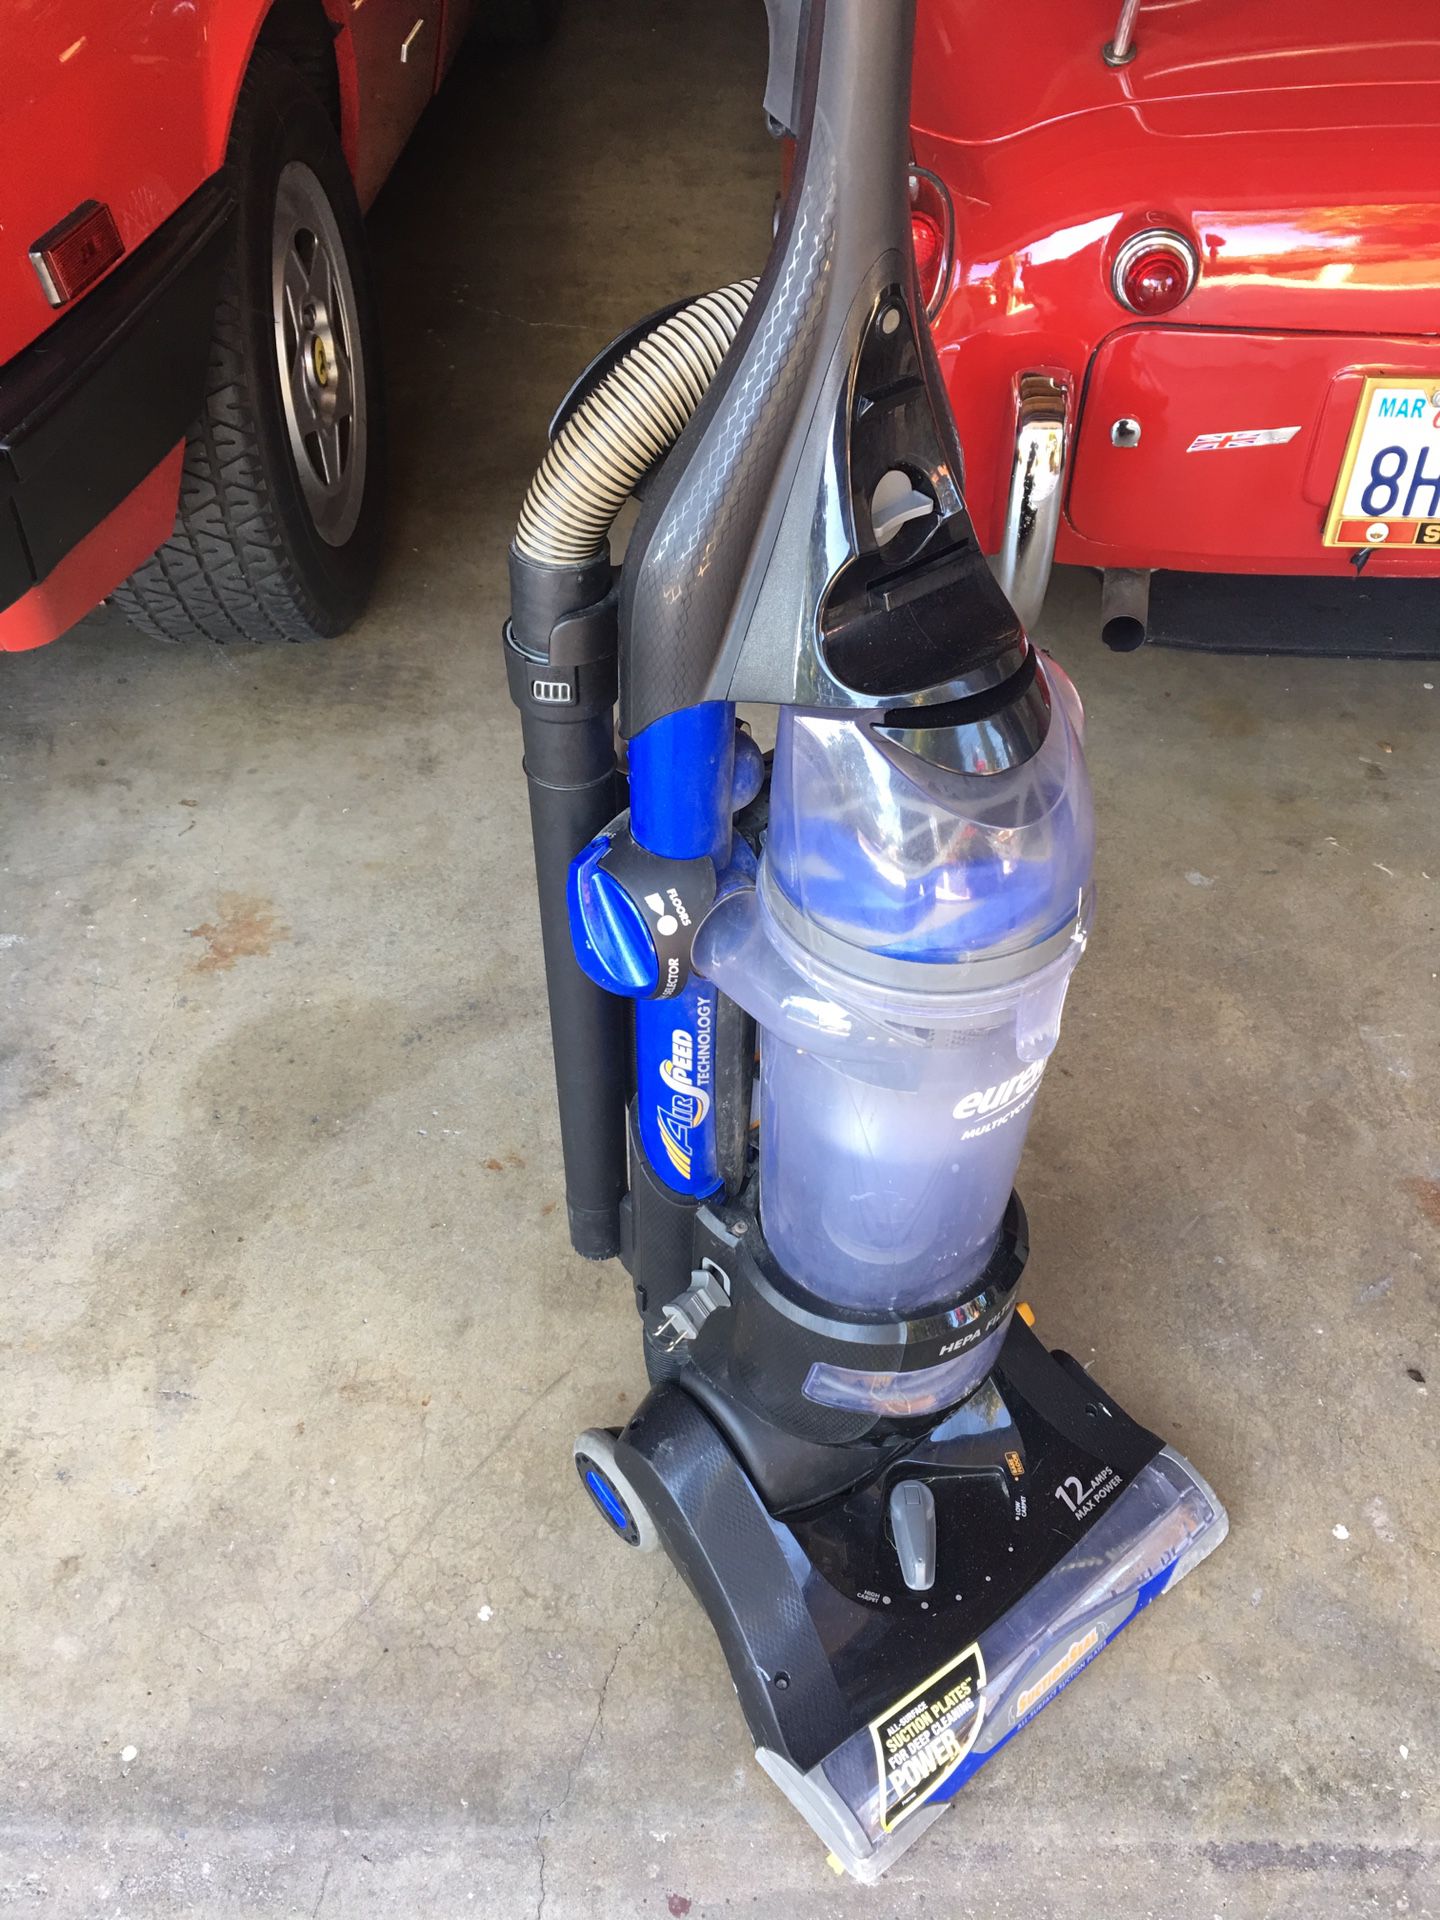 Eureka vacuum cleaners. Very nice and works perfect.